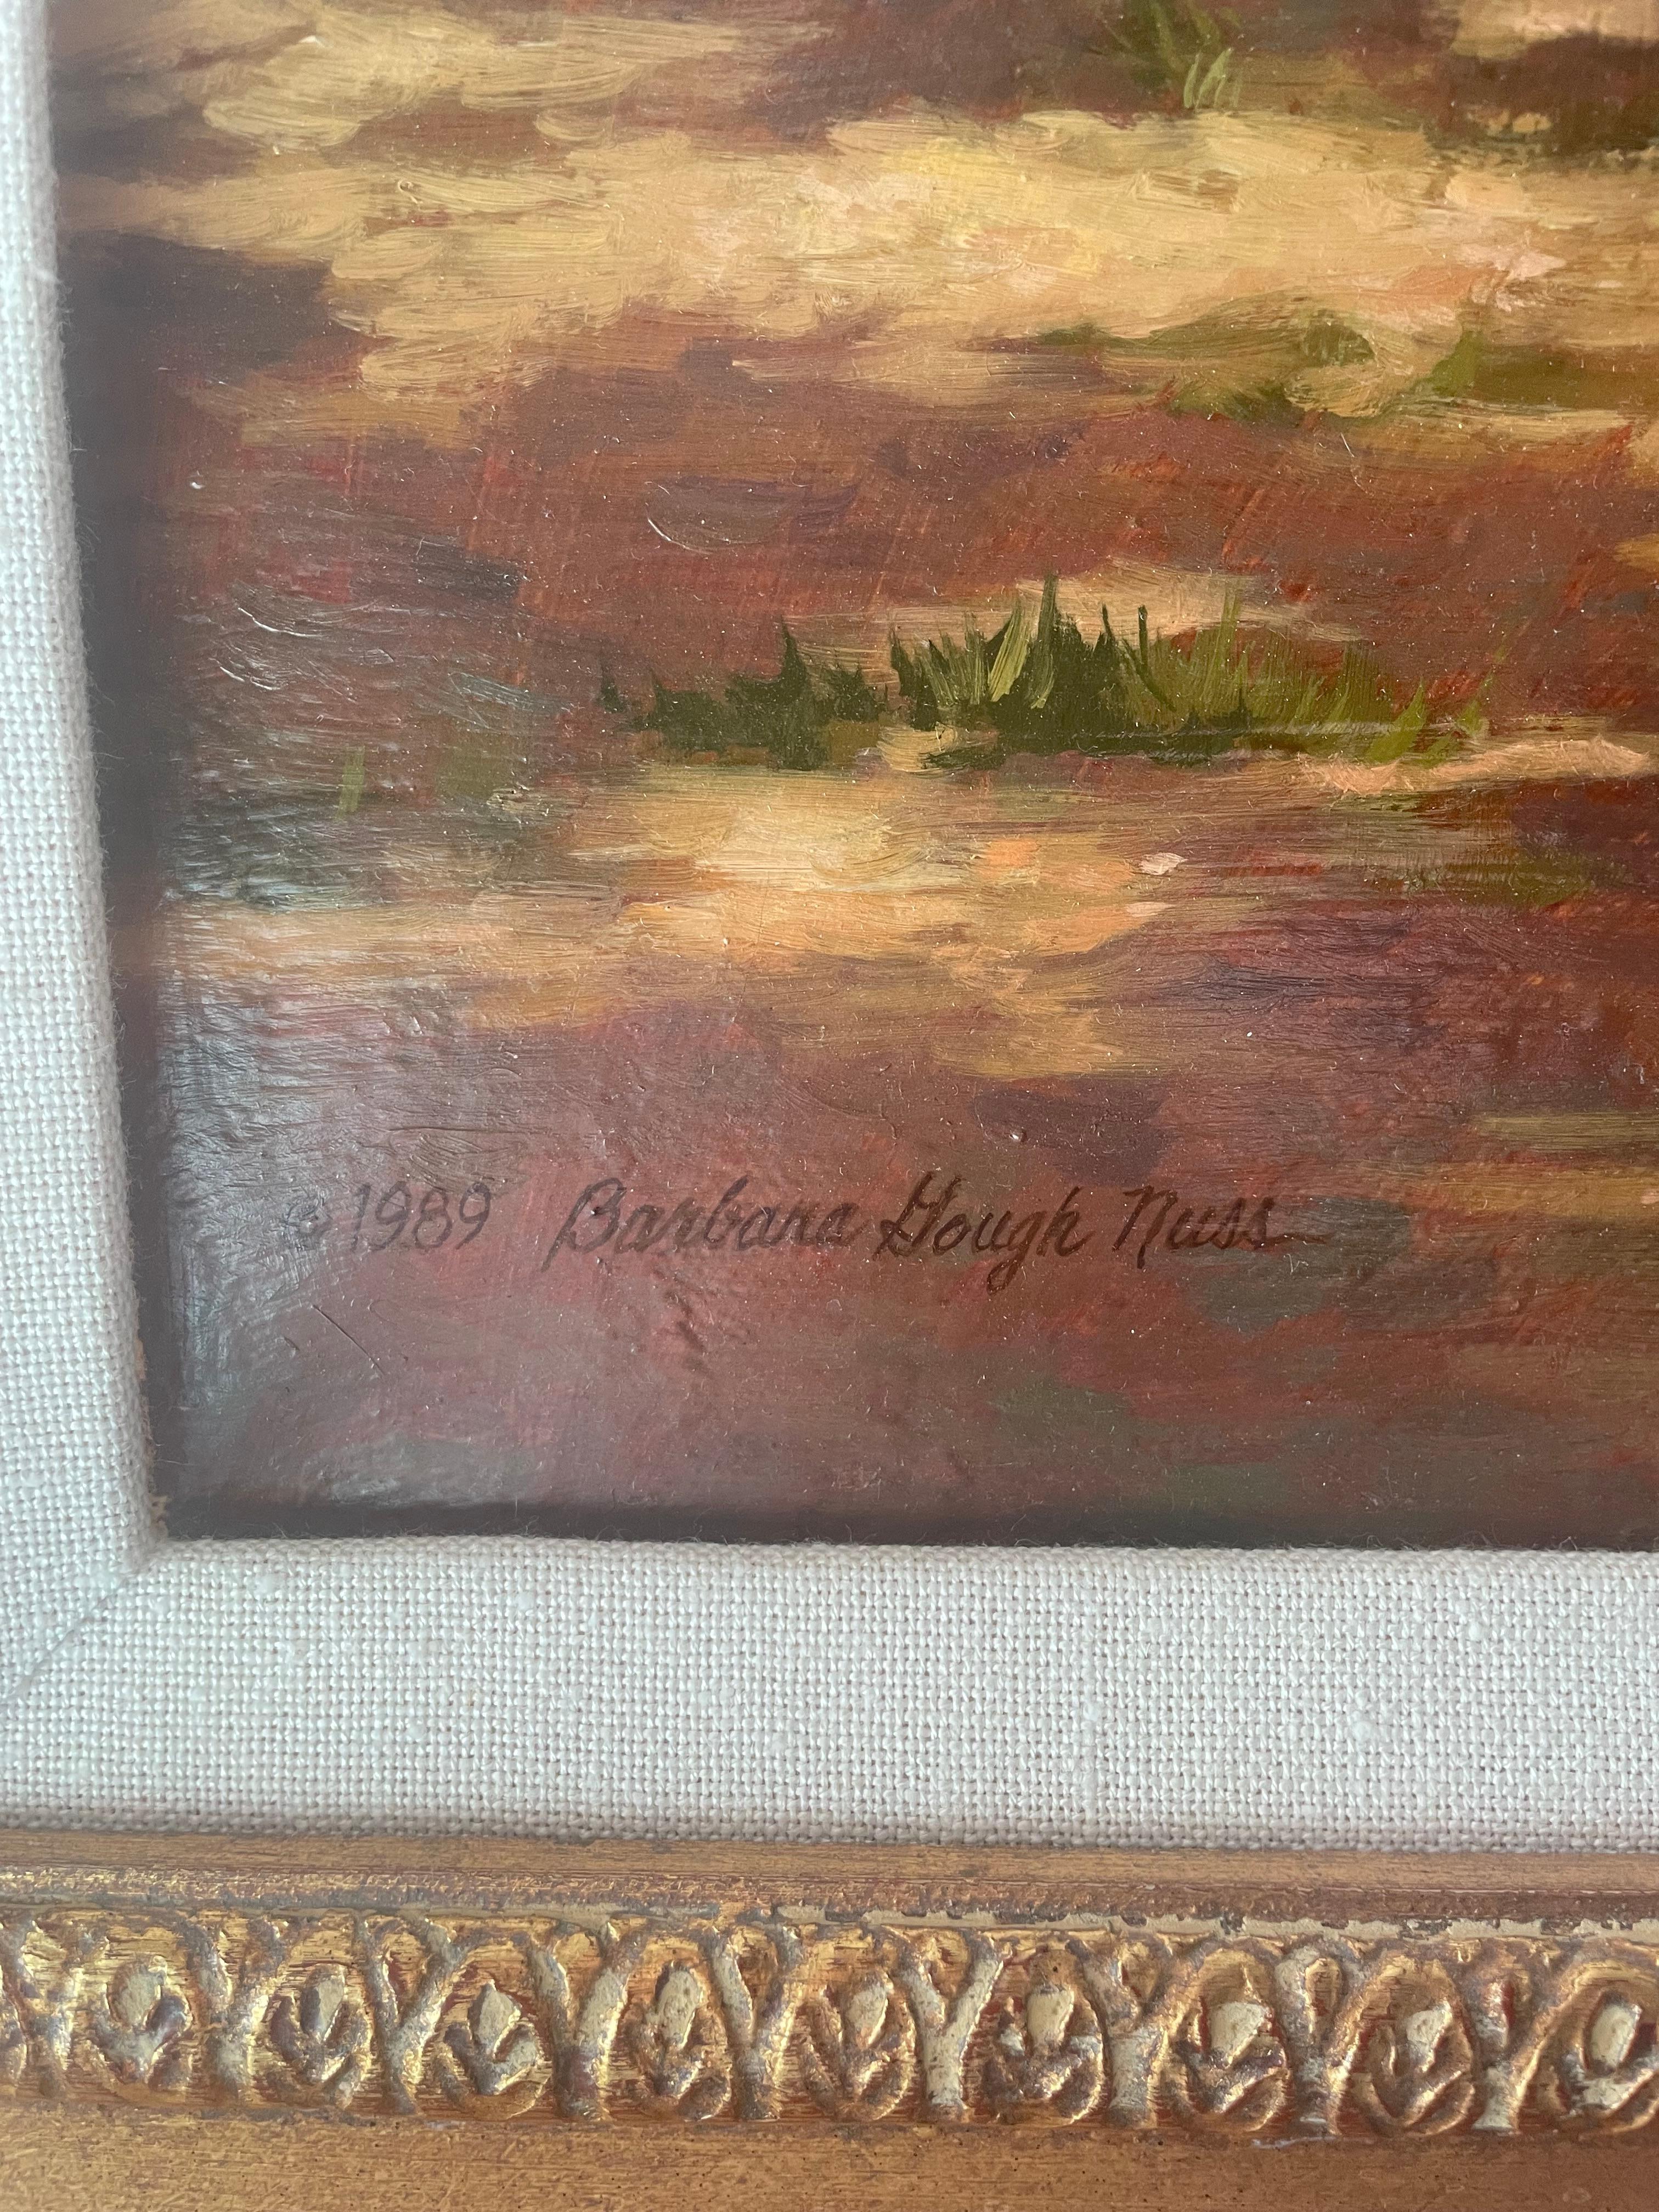 This is an Barbara g nuss original oil painting on canvas in good condition . Comes with providence in the back. The frame is 31x25

